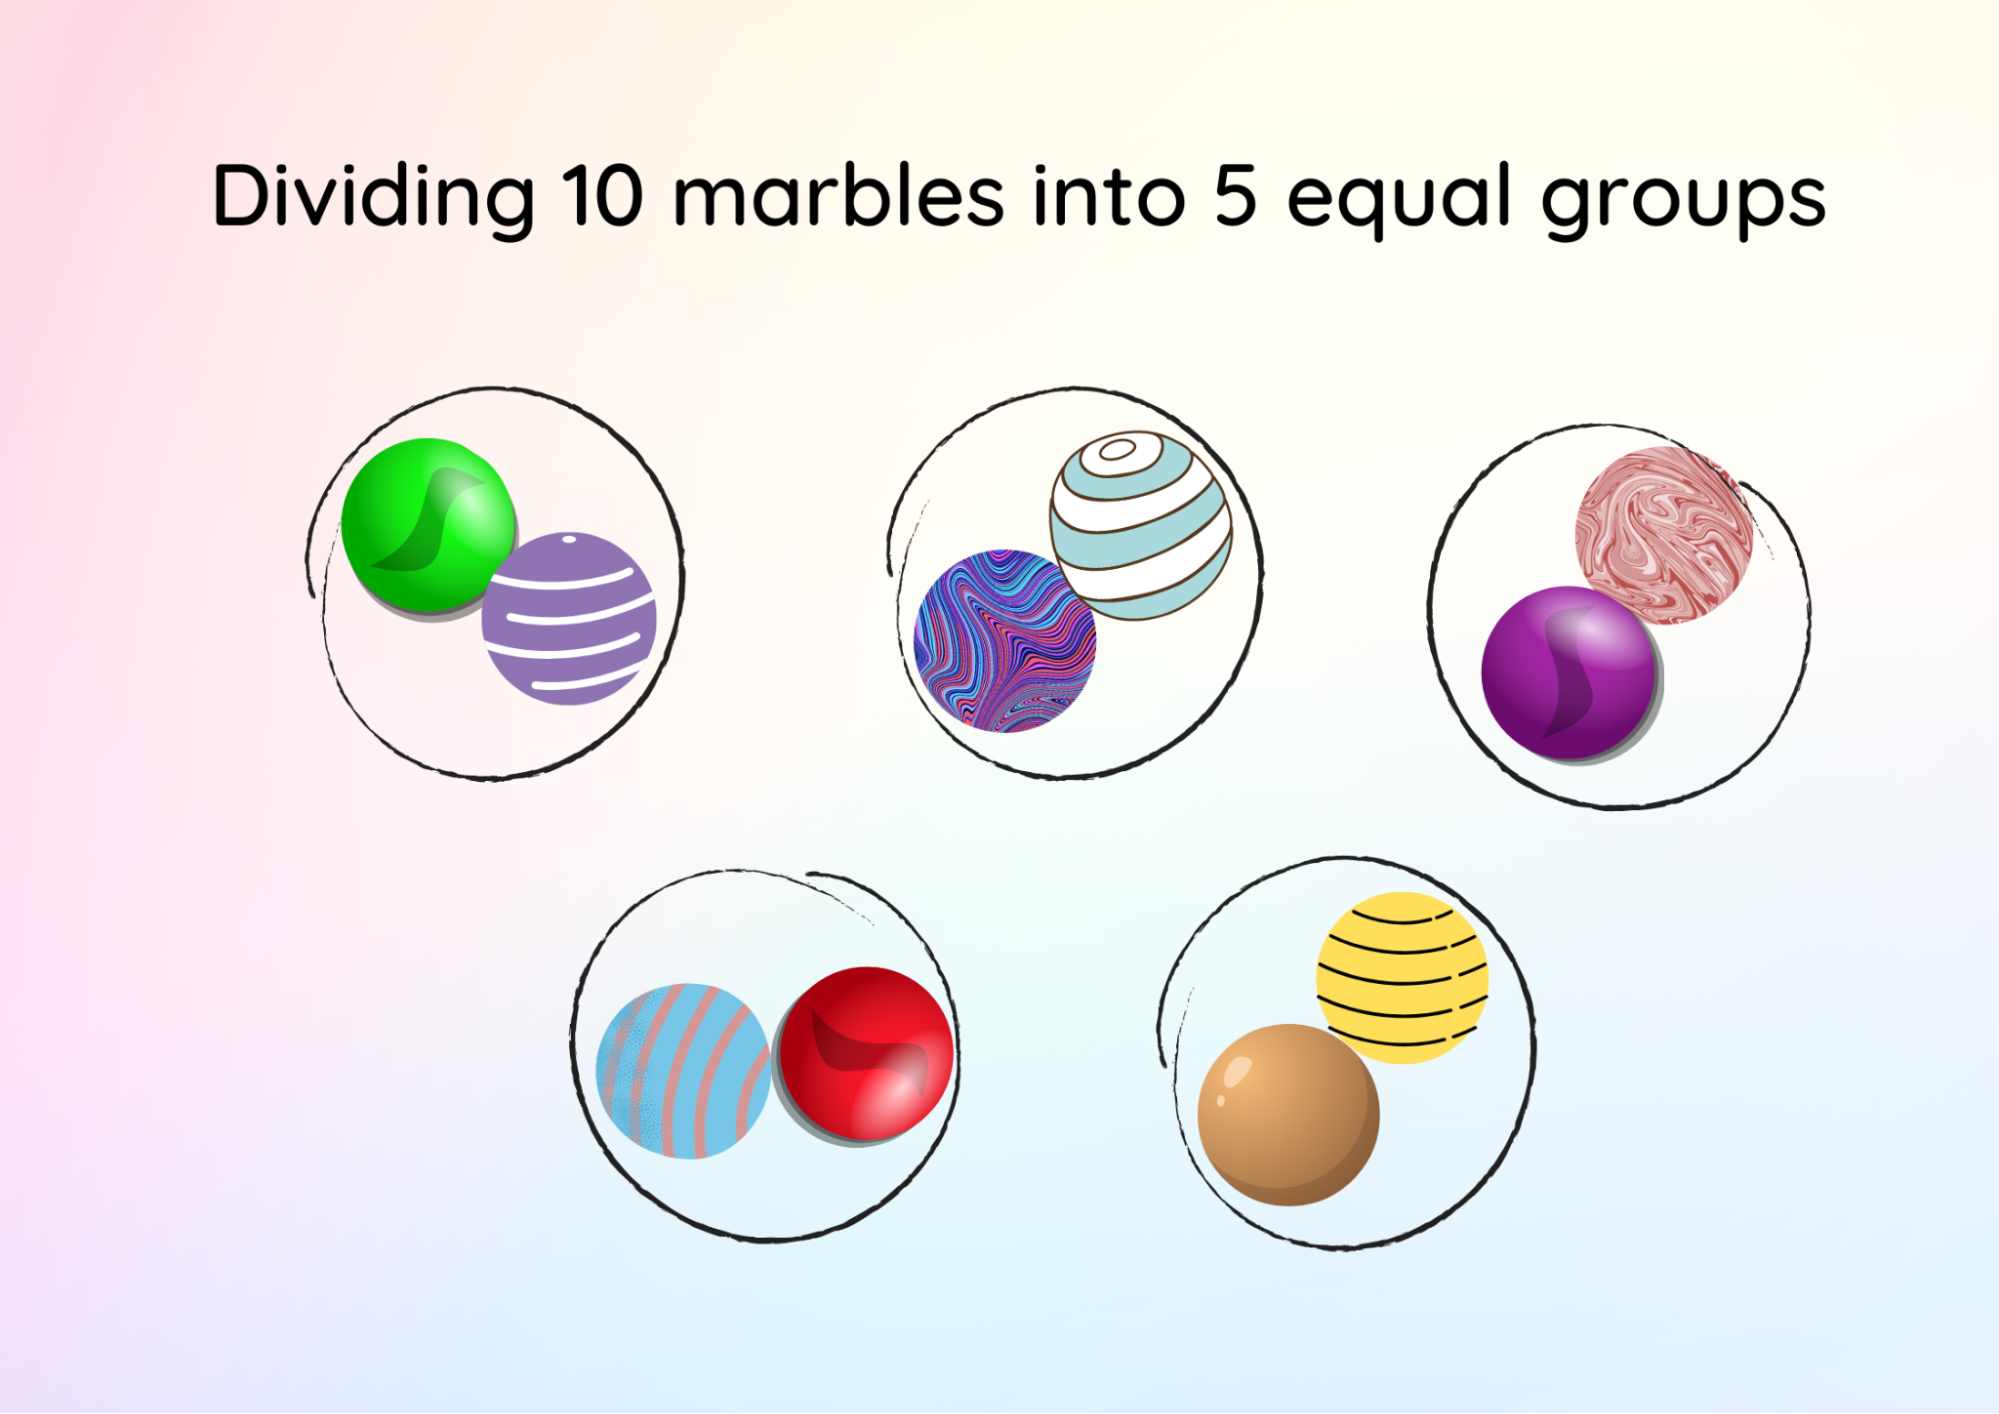 Image Shows 10 Objects Which are Equally Divided Into 5 Groups Each of 2 Objects